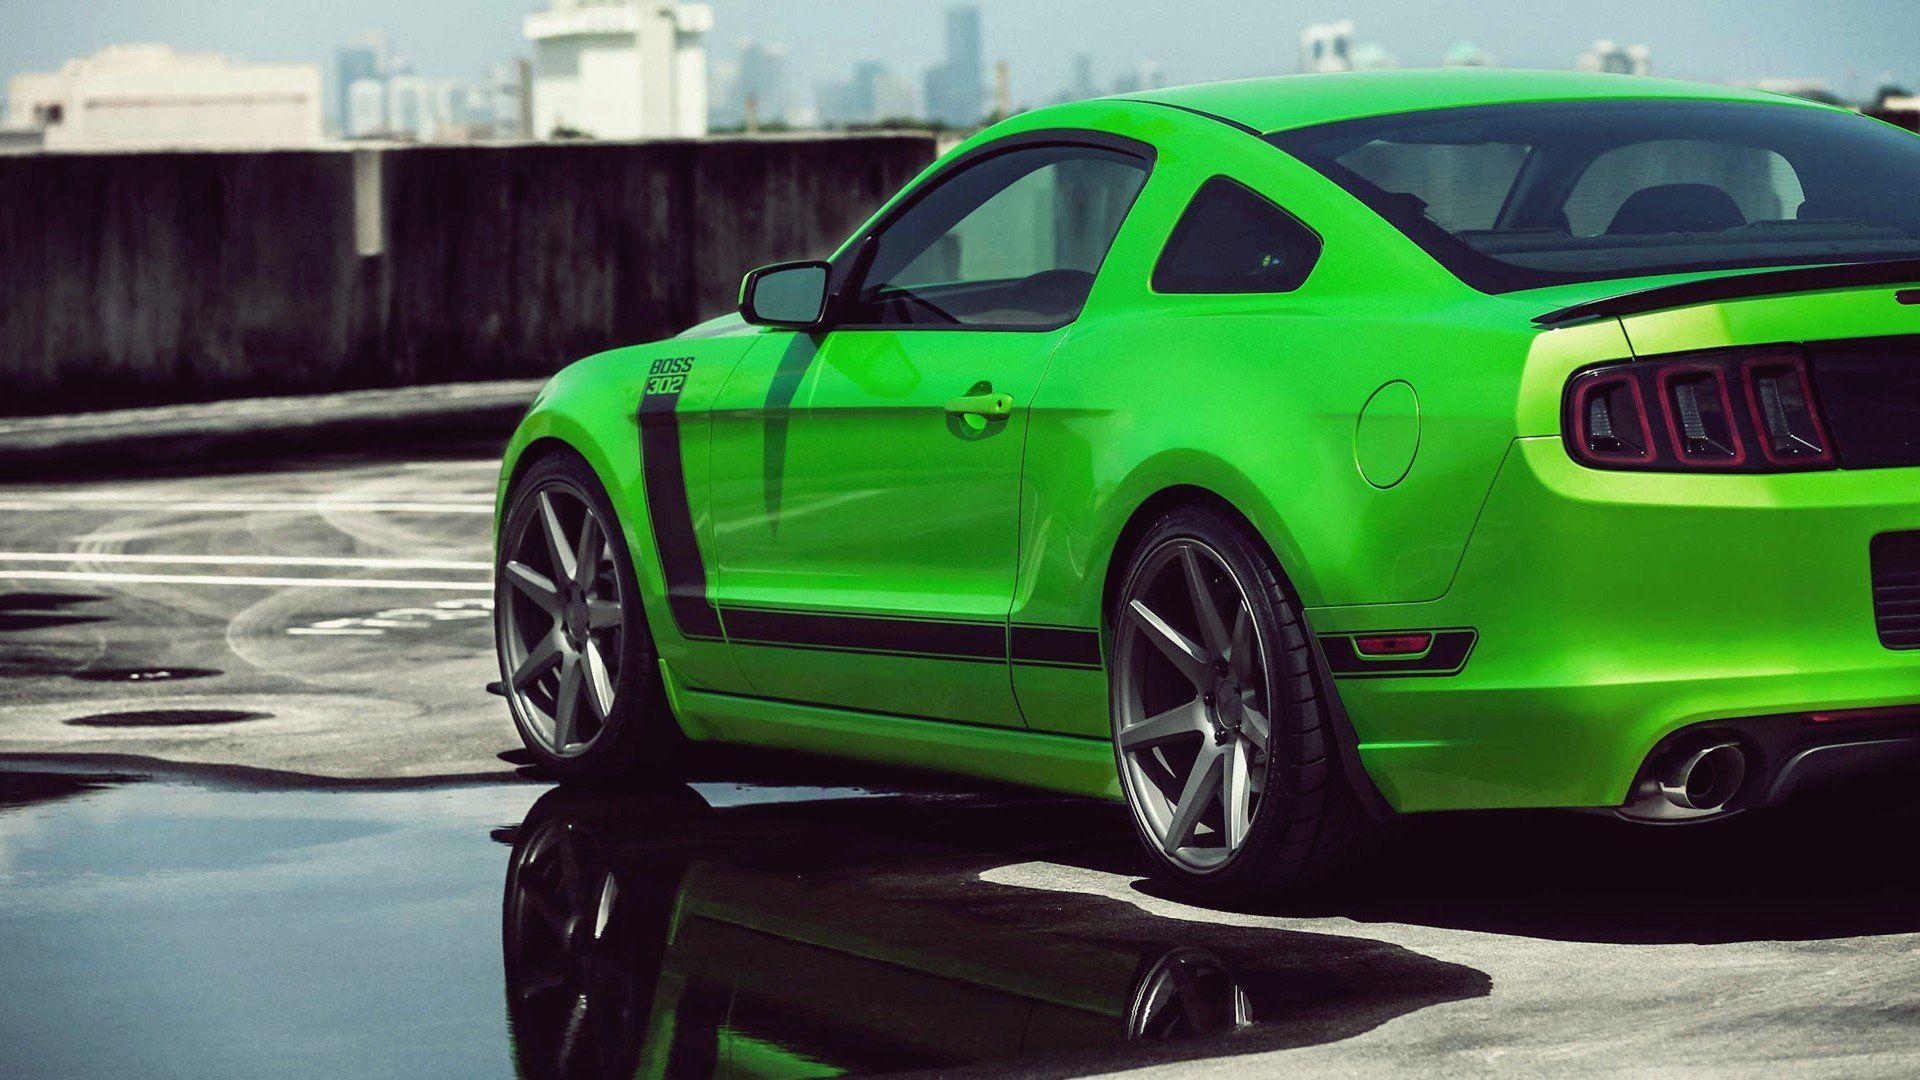 green, Cars, Ford, Vehicles, Ford, Mustang, Automotive, Ford, Mustang, Boss, 02automobiles, Ford, Mustang, Shelby Wallpaper HD / Desktop and Mobile Background